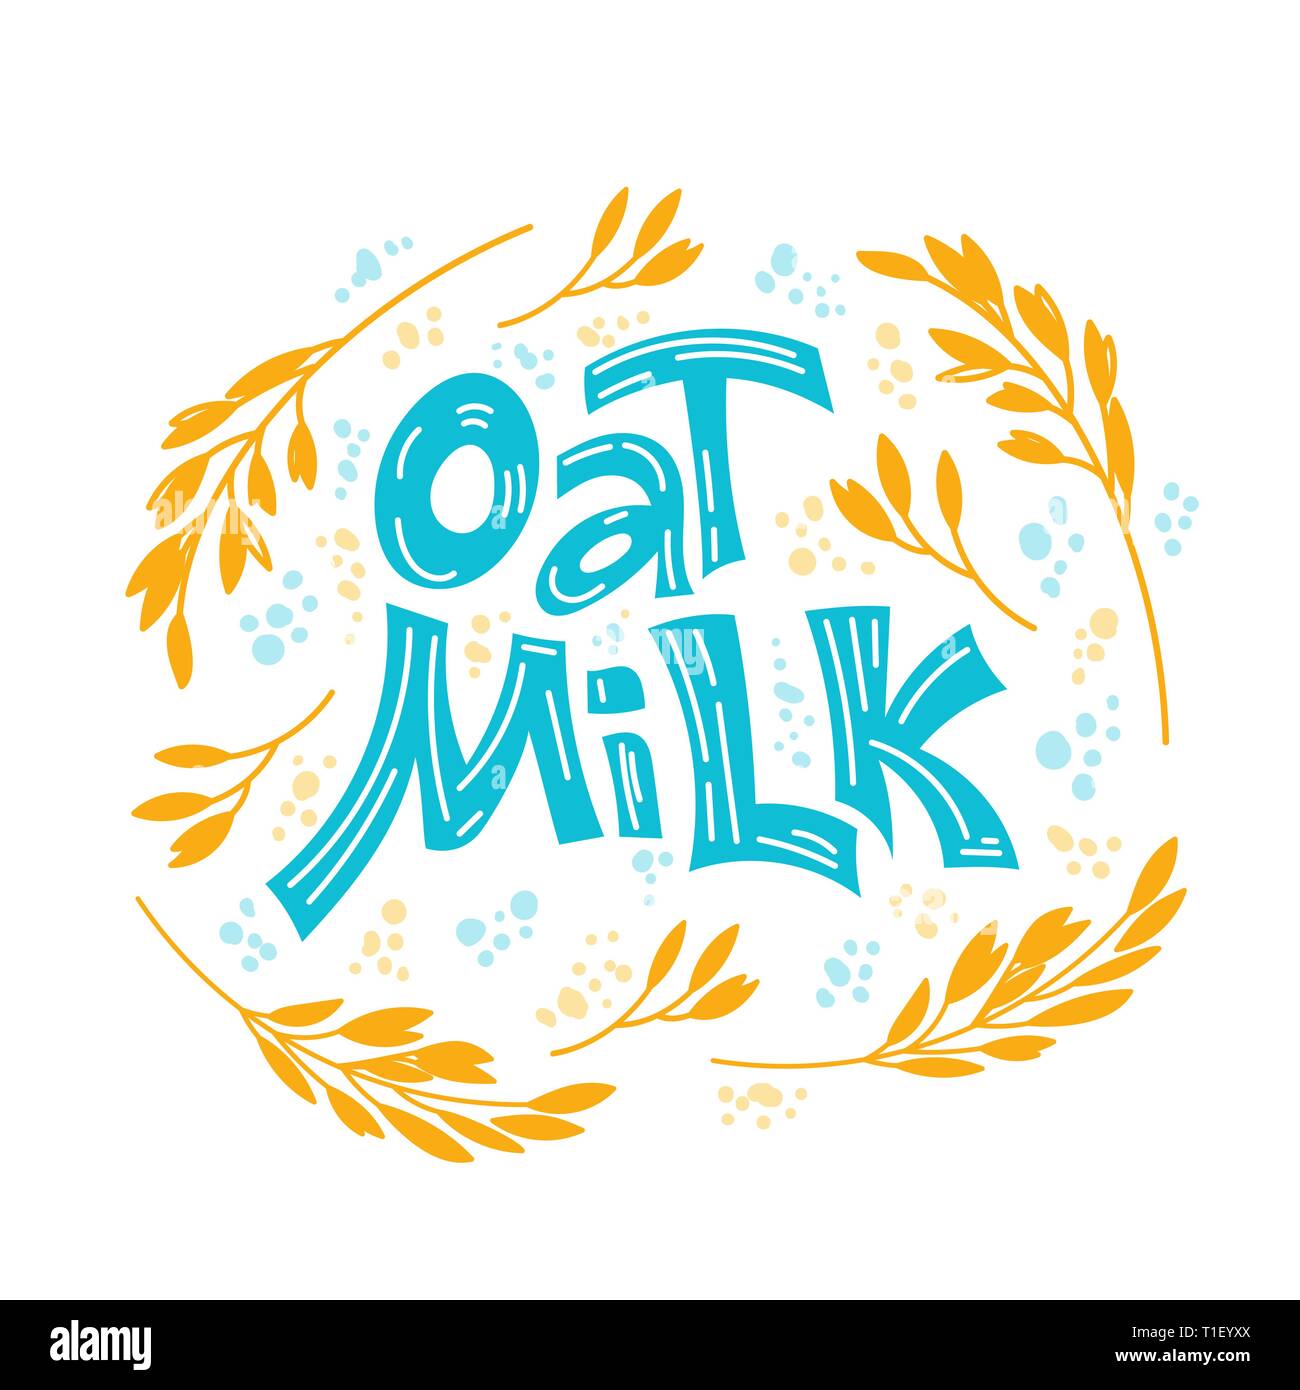 Oat milk hand drawn lettering. Spikes and grains of oats, glass with oat milk, carton box and glass jar of milk. Doodle style, vector illustration. Stock Vector